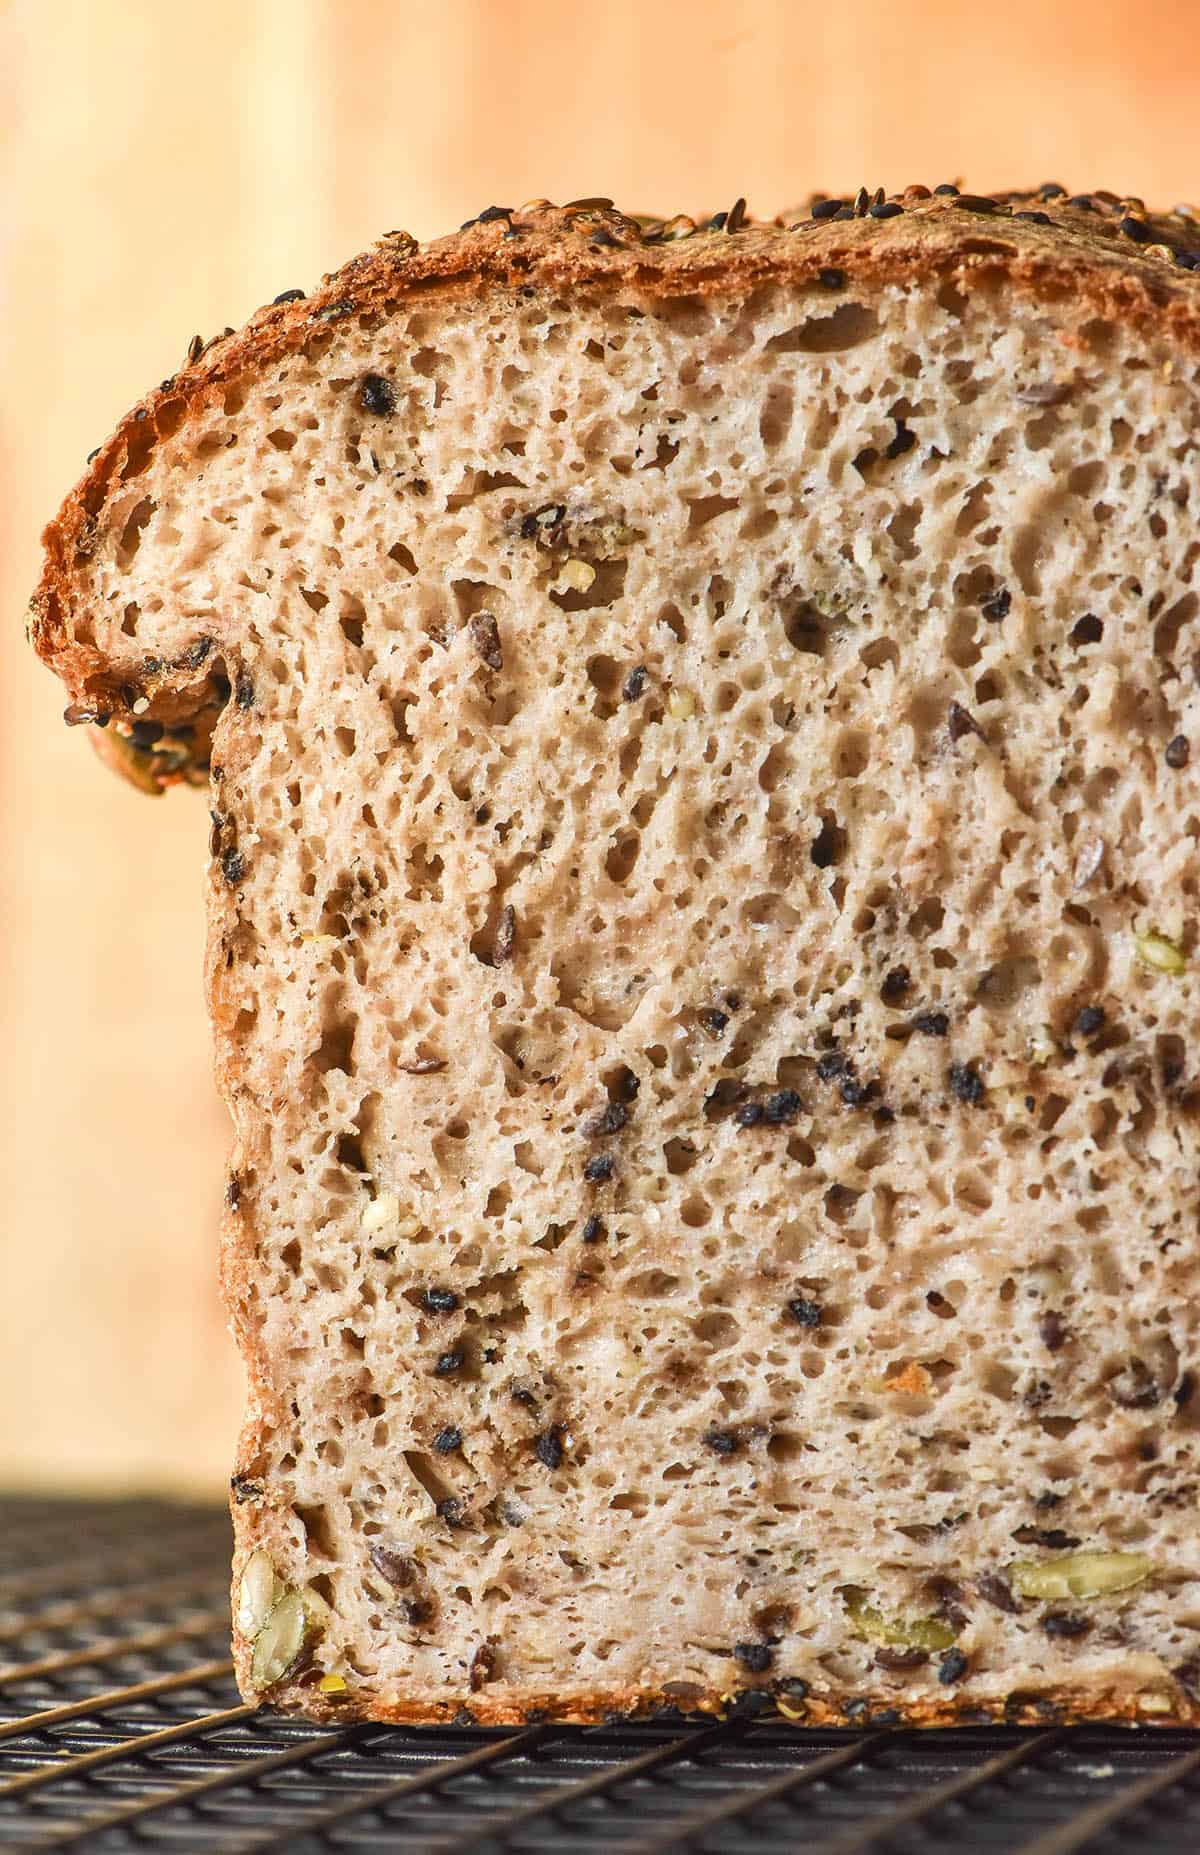 A side on close up image of a sliced loaf of gluten free seeded bread on a cooling rack set against a pale wood backdrop.